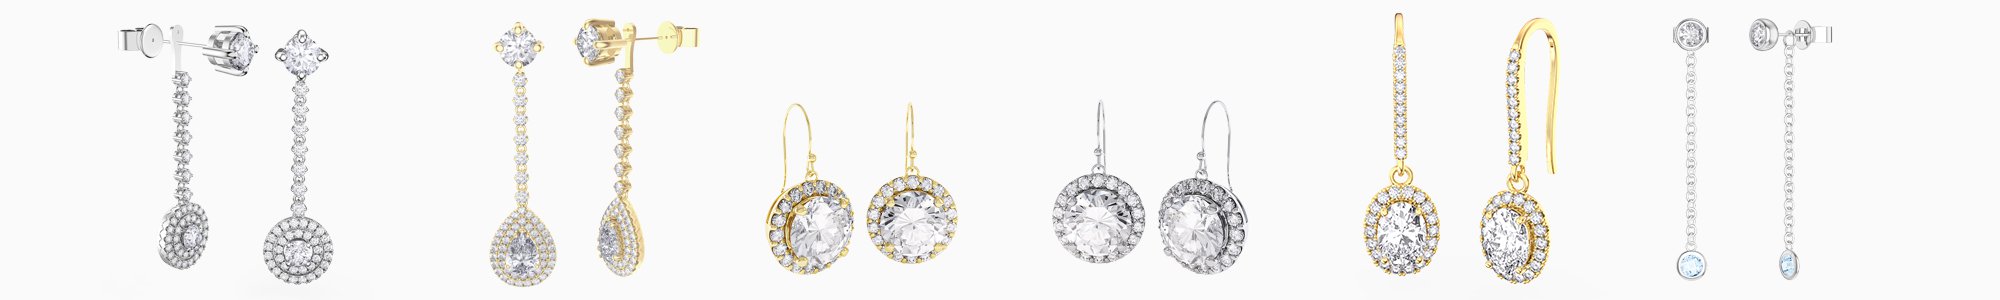 Shop Drop Earrings by Jian London. Buy direct and save from our wide selection of Drop Earrings at the Jian London jewellery Store. Free UK Delivery